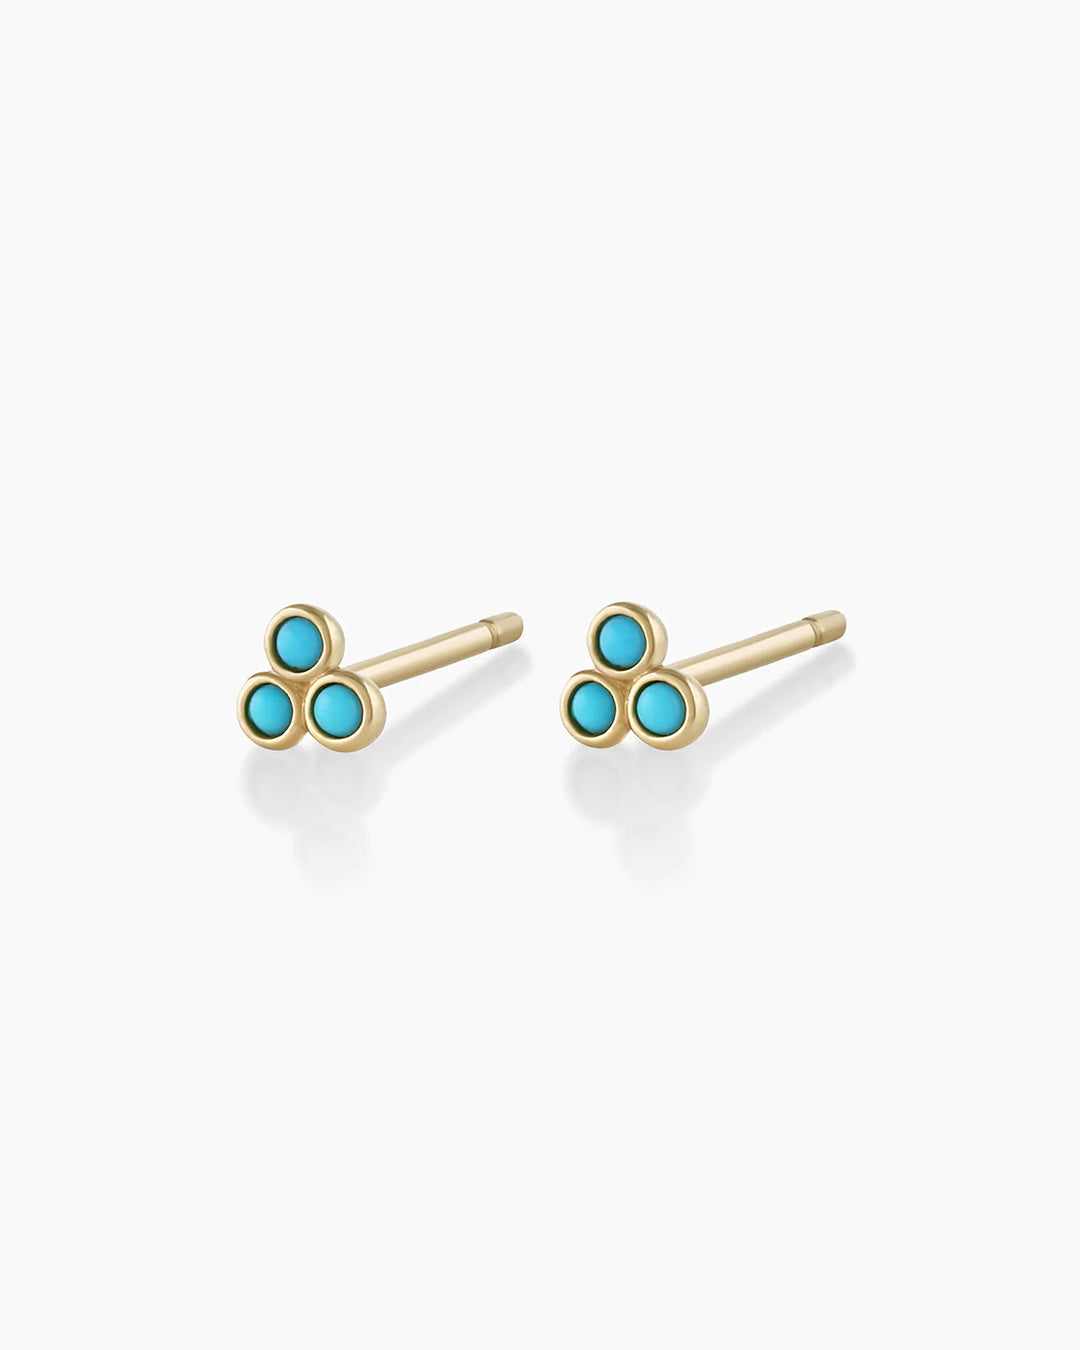 Genuine Turquoise Earrings in 14K Yellow Gold, Vintage Inspired Bezel Set  Oval Stud Earrings, Teal Color by the Yard